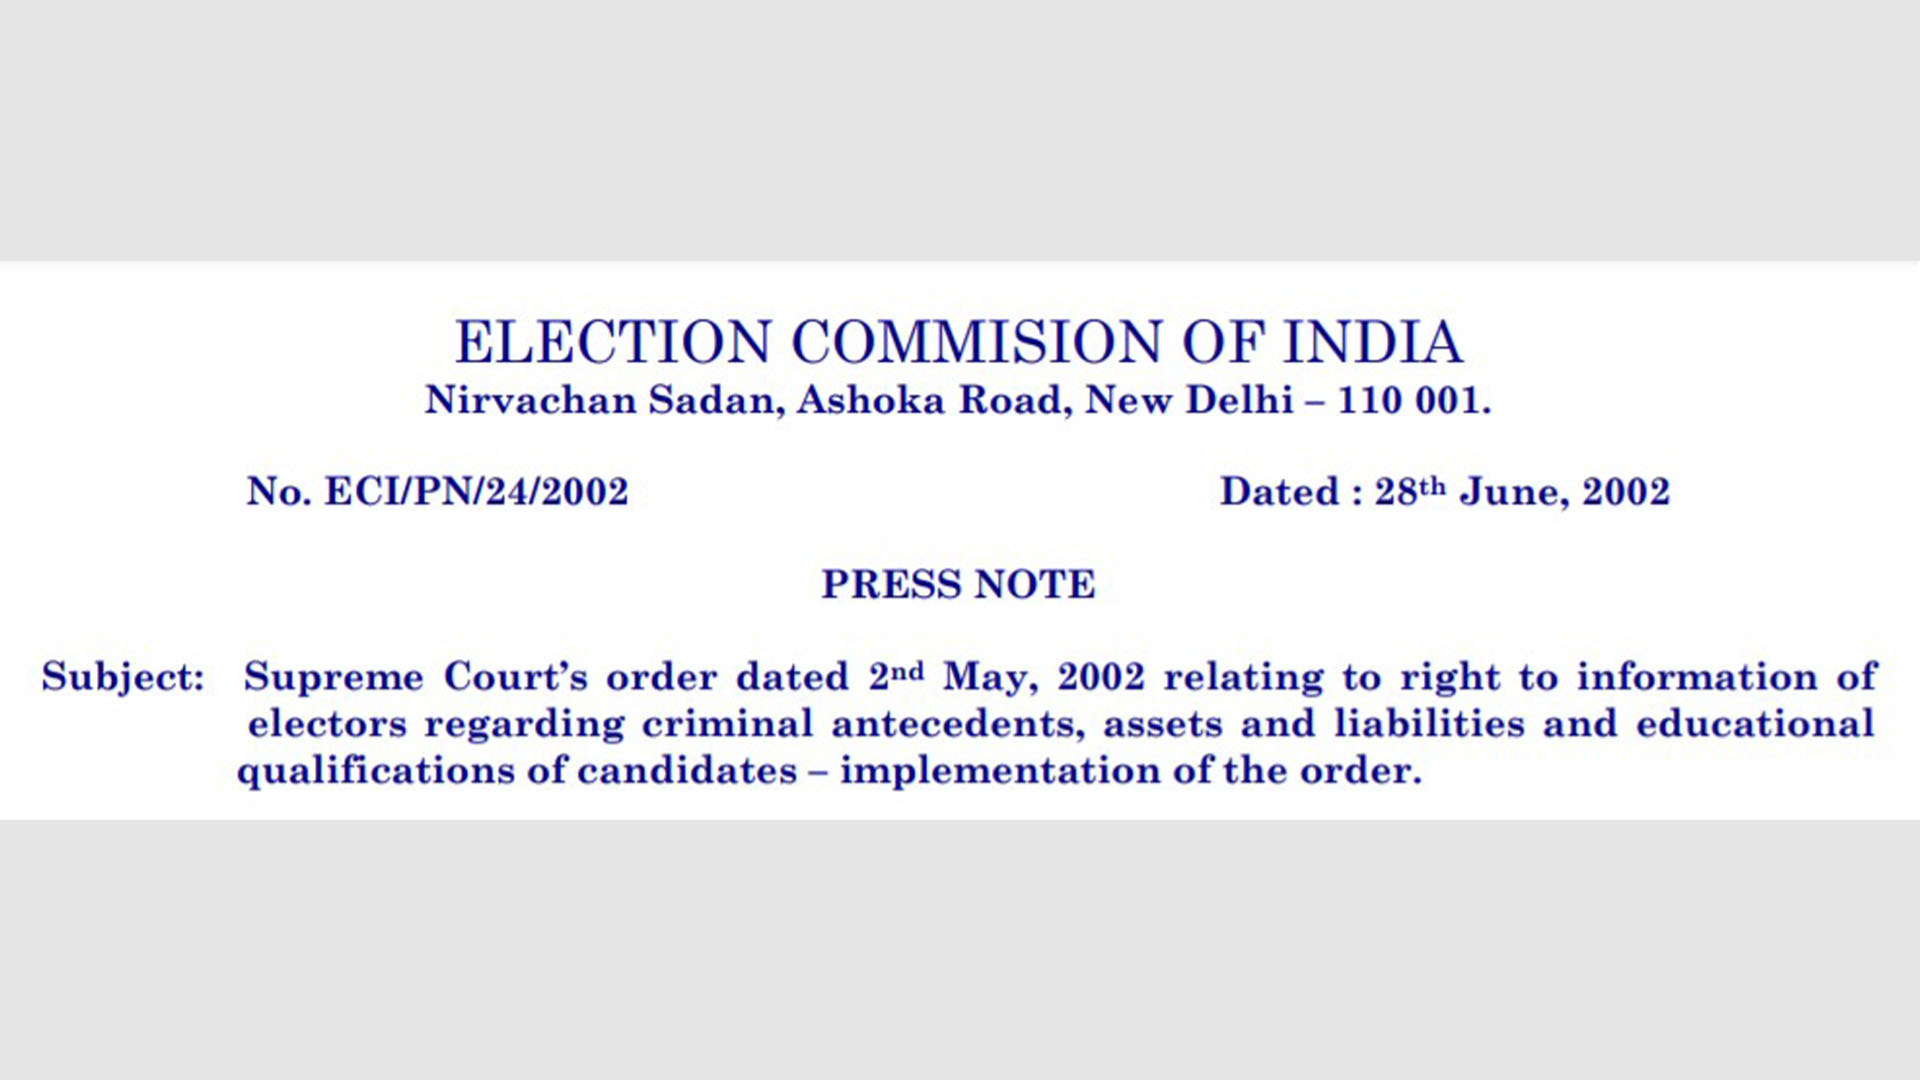 Supreme Court’s order dated 2nd May, 2002